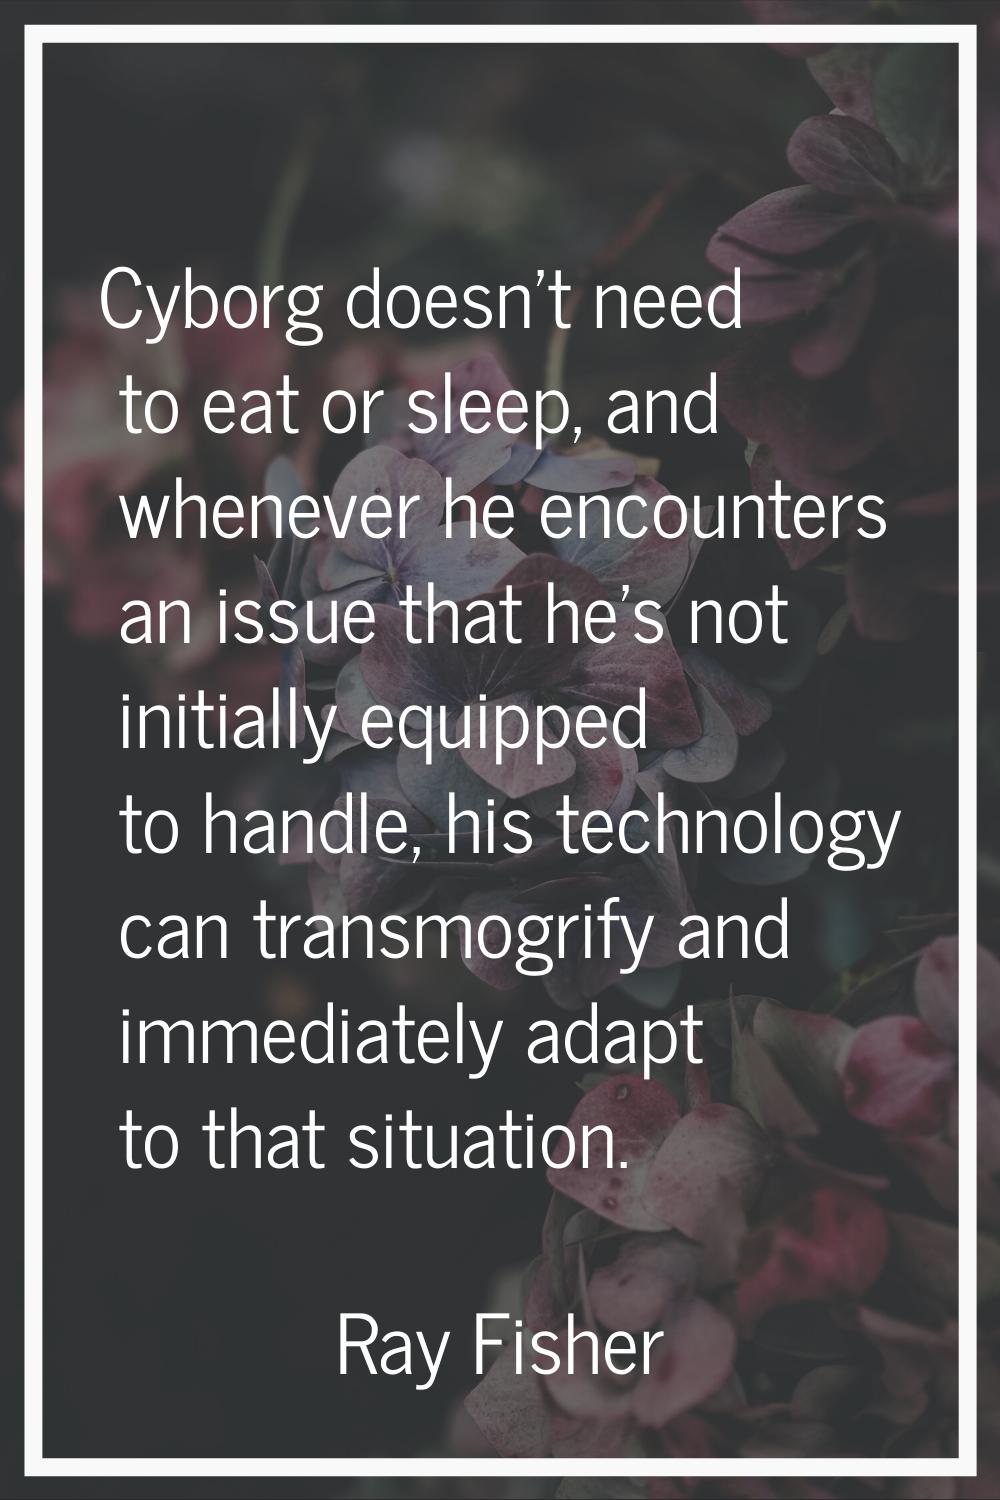 Cyborg doesn't need to eat or sleep, and whenever he encounters an issue that he's not initially eq